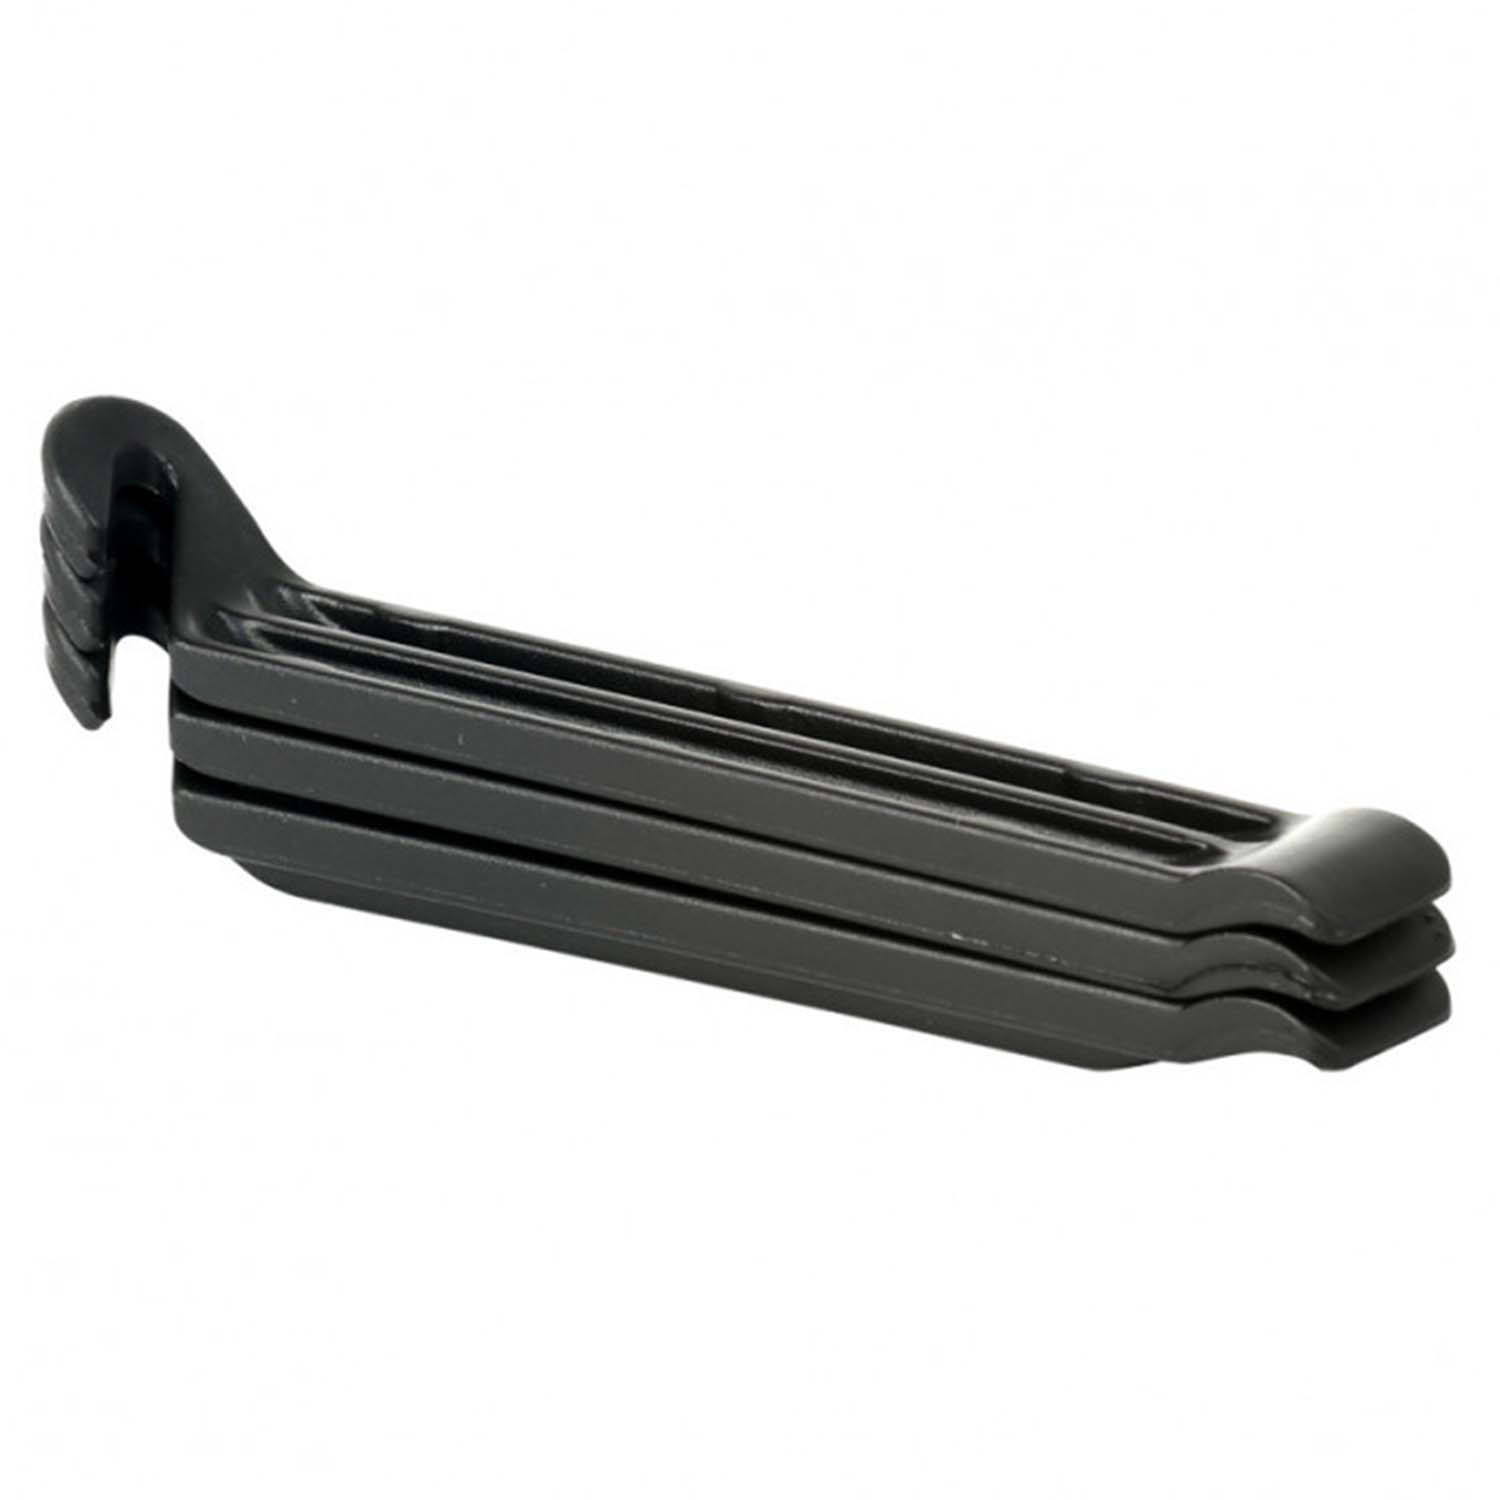 Монтажка Zefal Tyre Levers Dp20 3 Pc On Card Black